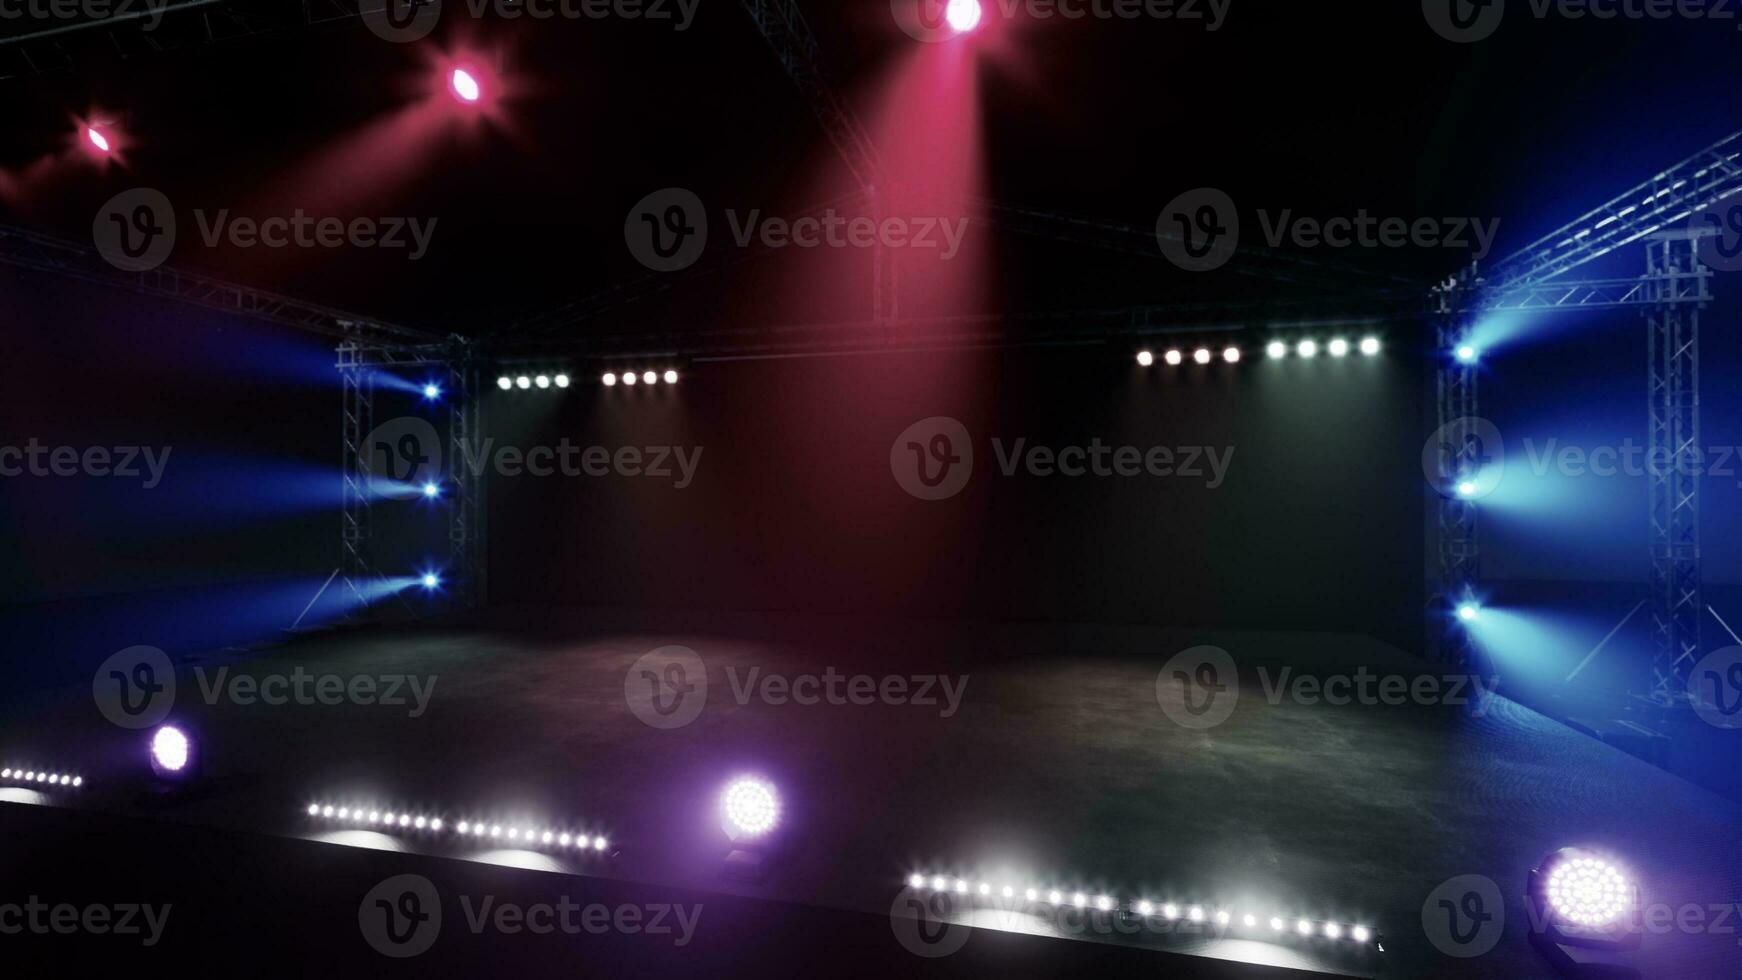 Free stage with lights from lighting devices photo